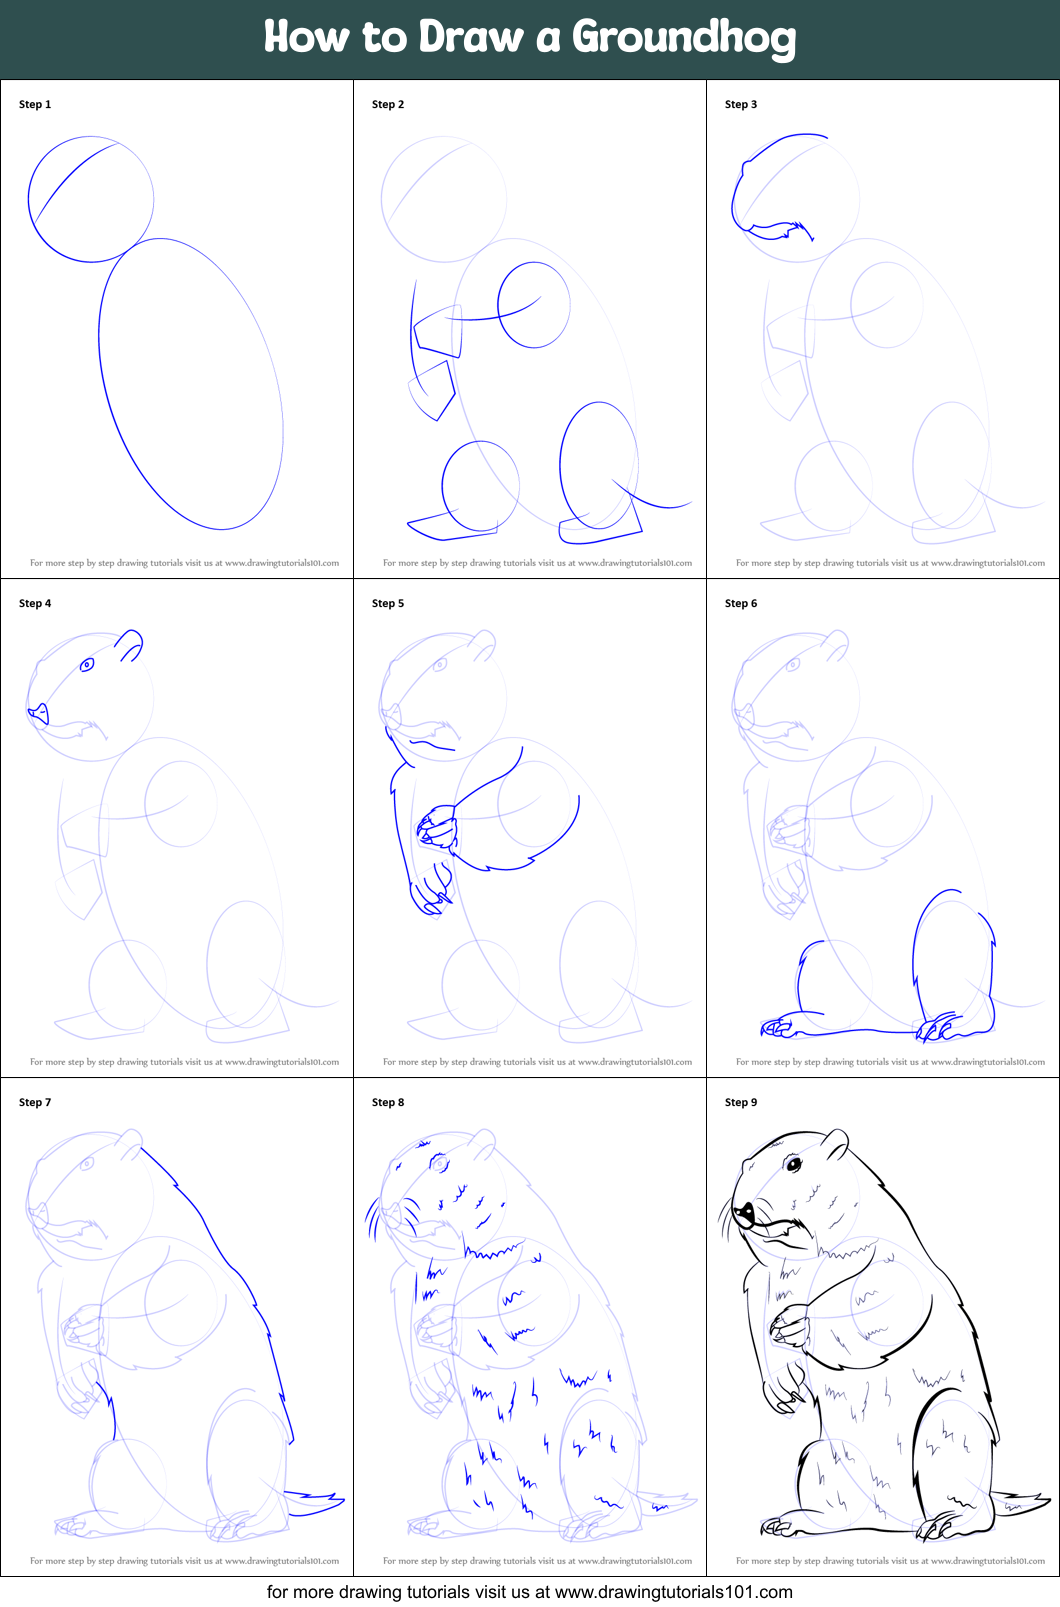 How to Draw a Groundhog printable step by step drawing sheet